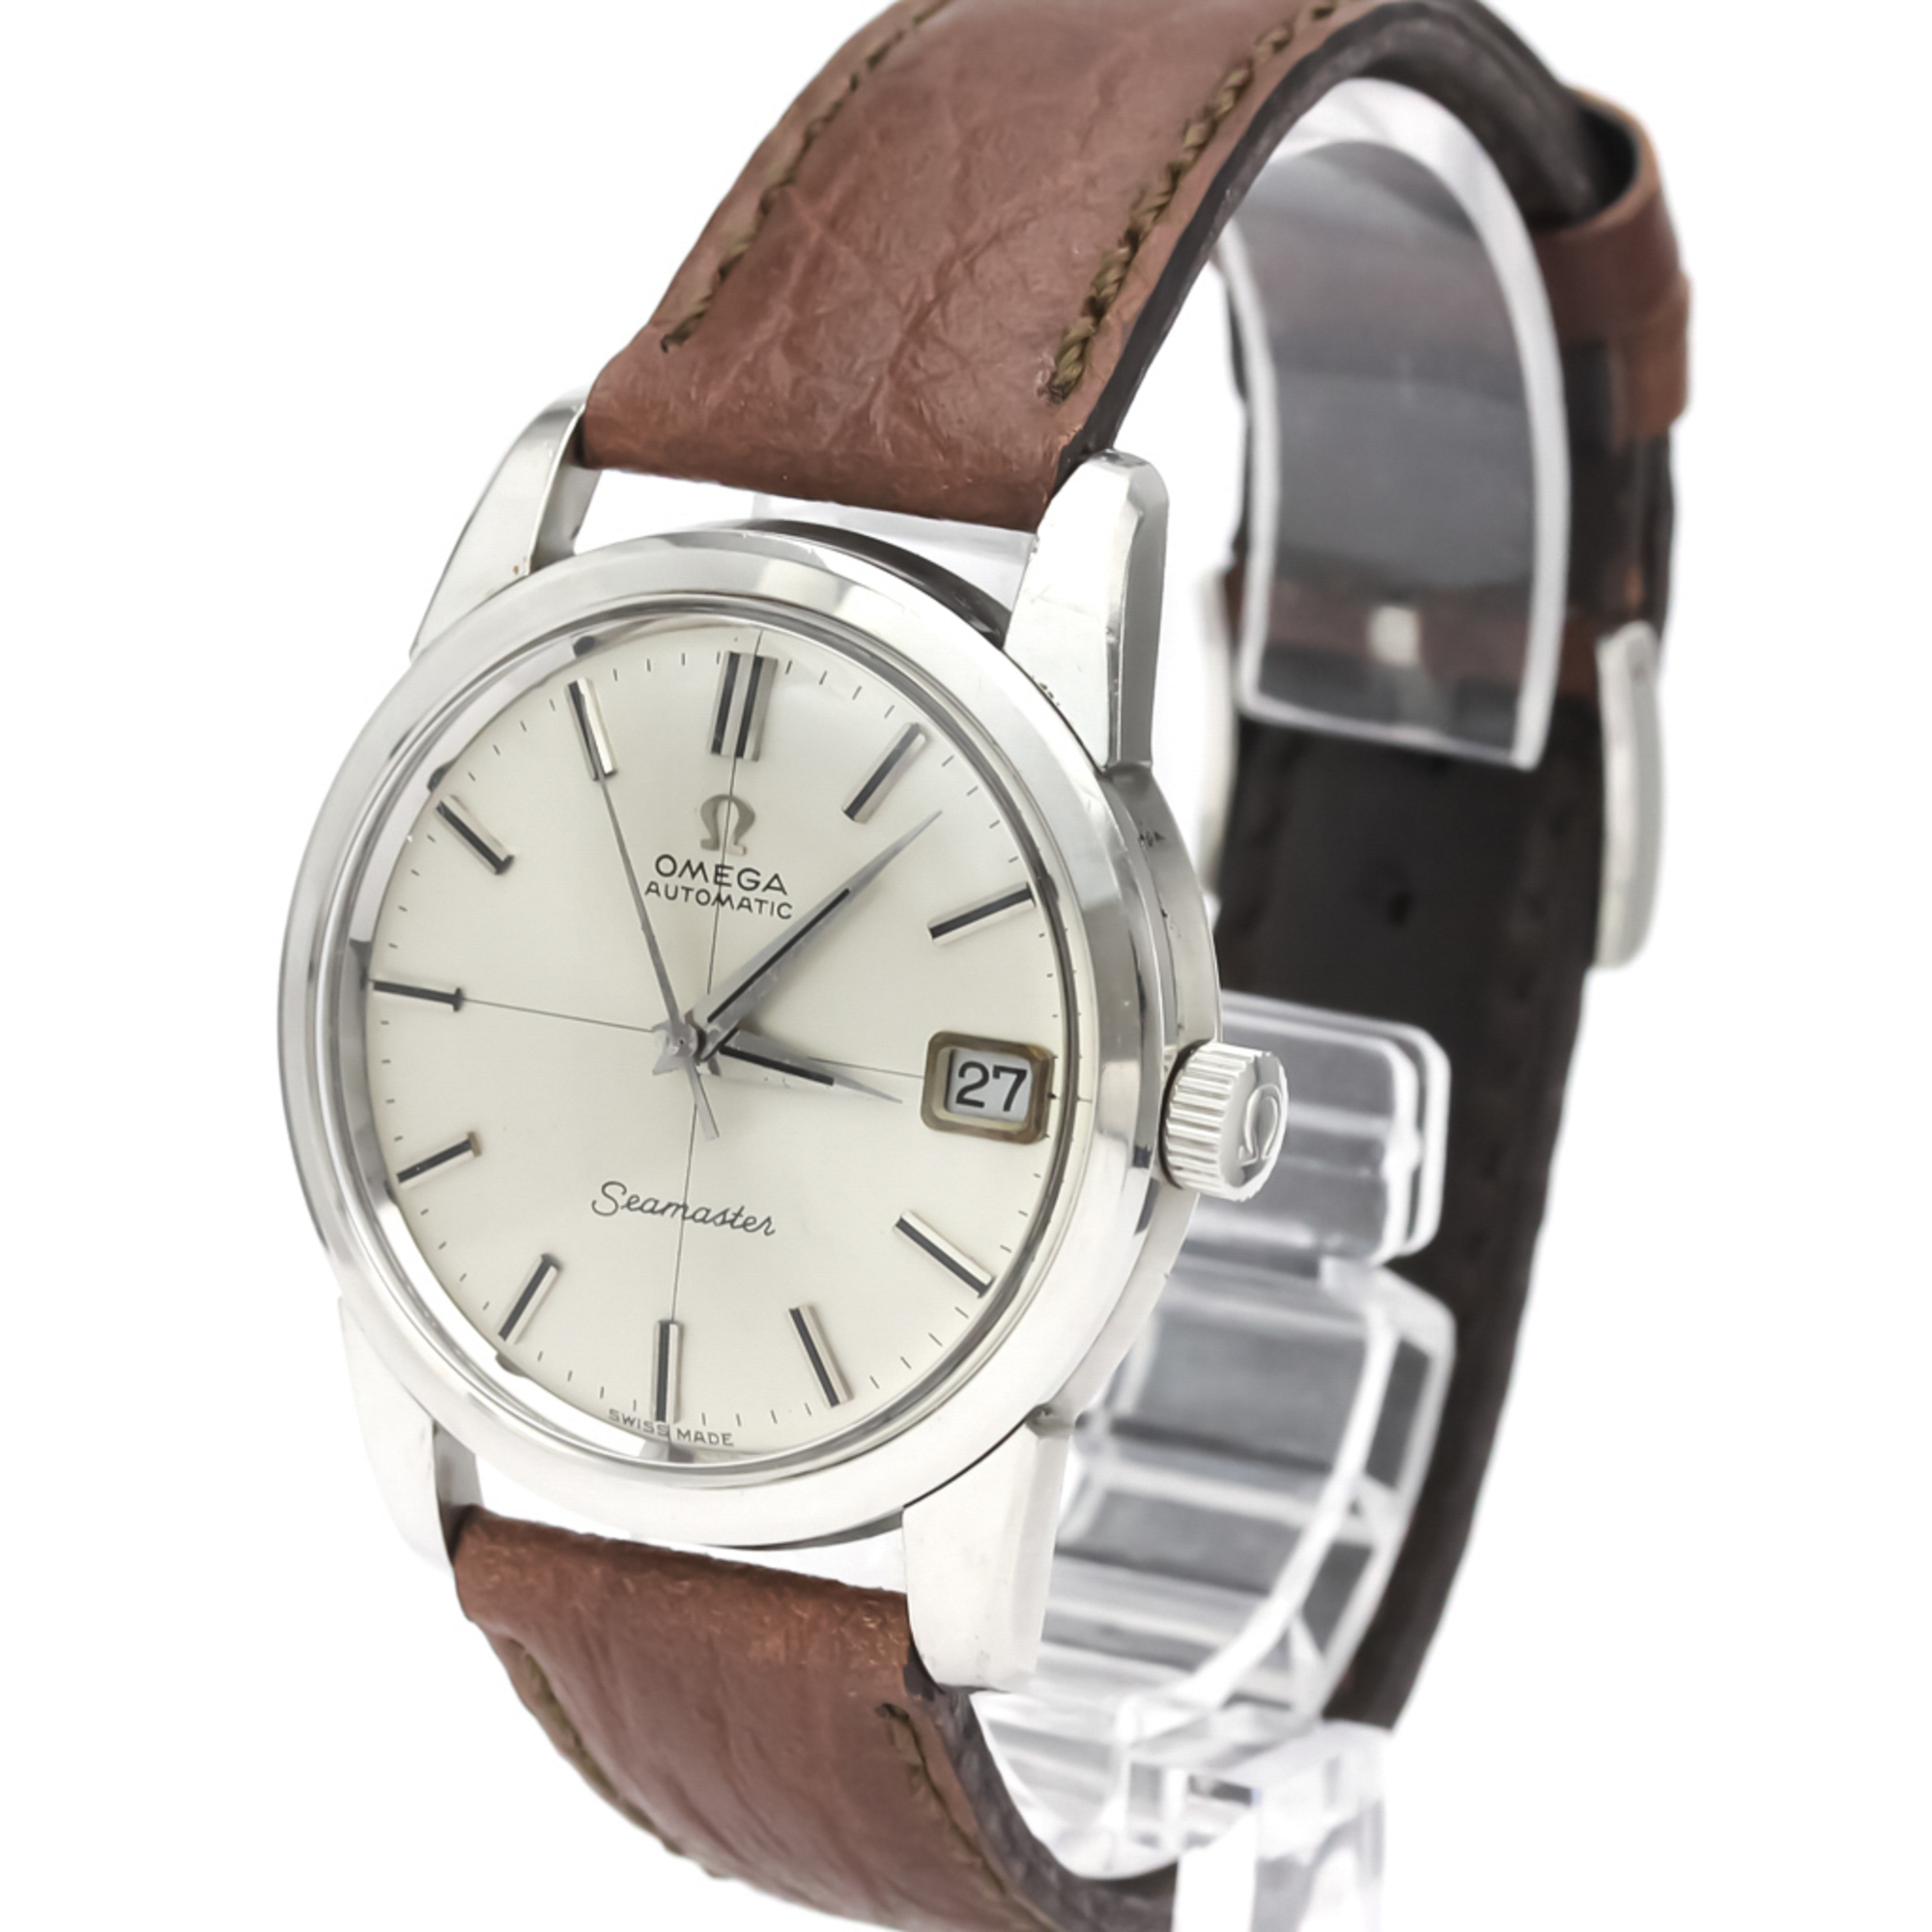 Omega Seamaster Automatic Stainless Steel Men's Dress Watch 166.009